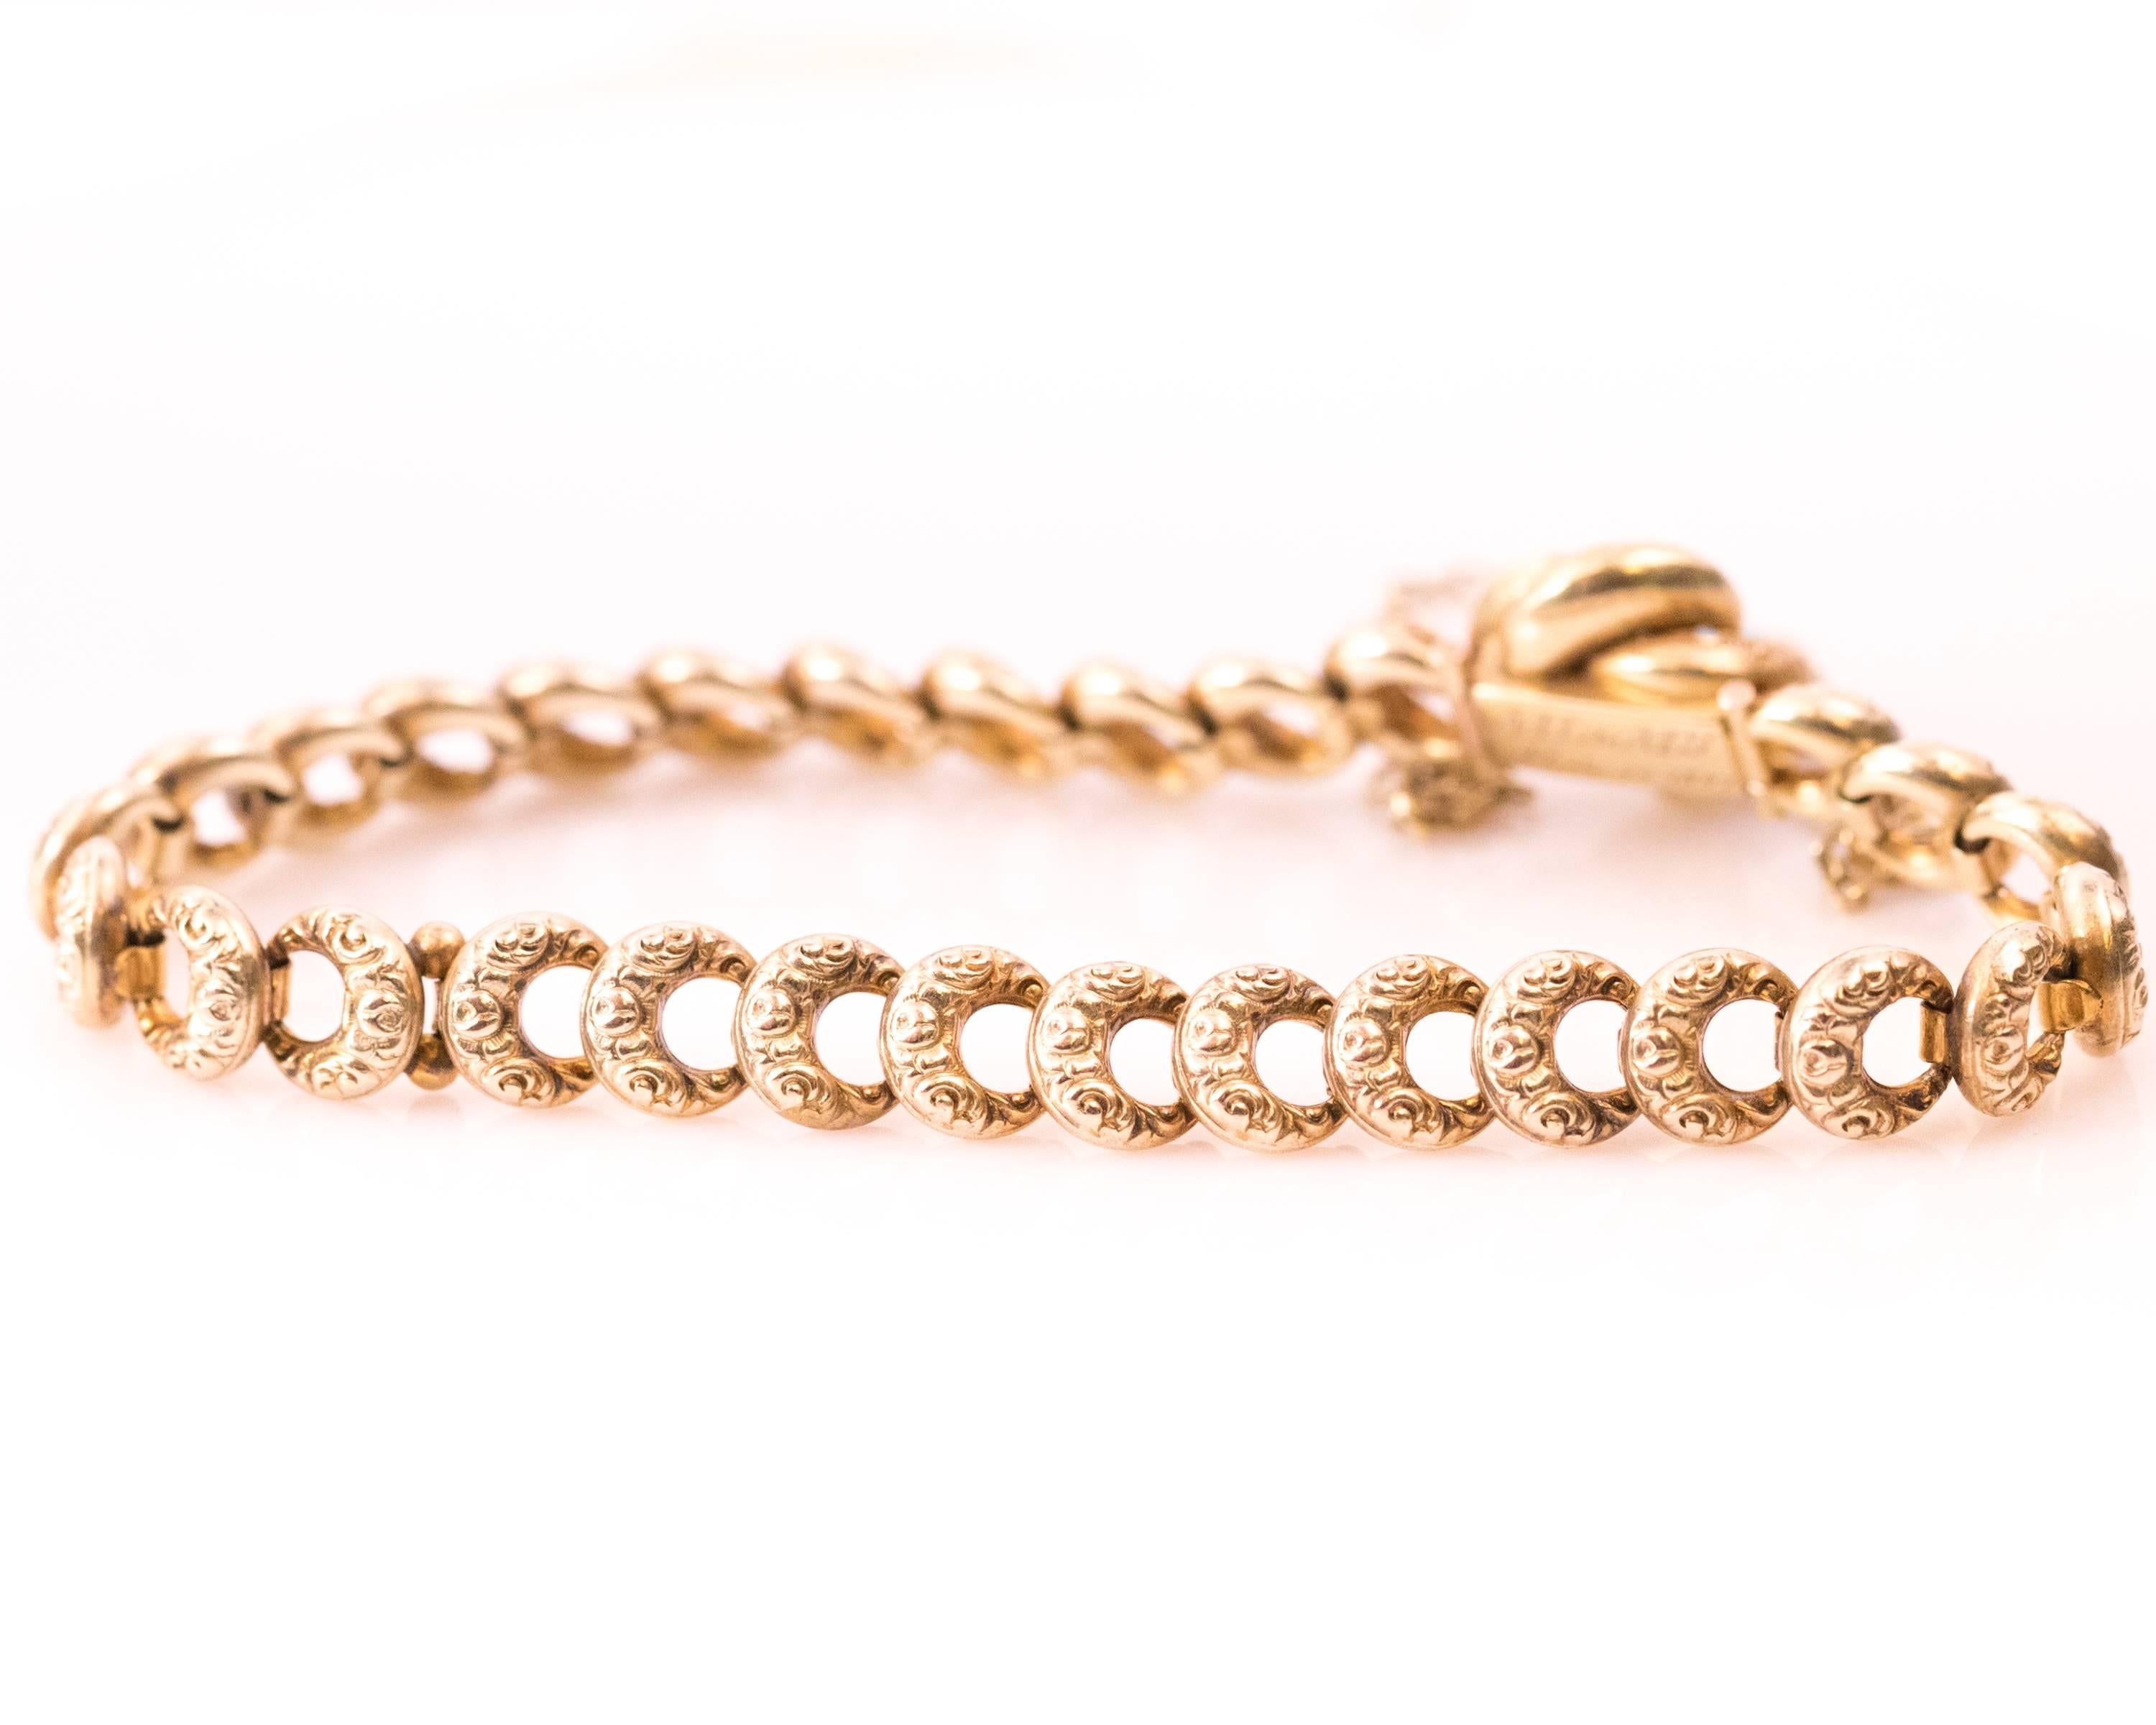 This 1897 Victorian Old Mine Diamond and 14K Yellow Gold Crescent Link Bracelet features Victorian Enamel details. The crescent link chain comes together at the flower knot clasp. The center of the clasp has .03 carat Old Mine round solitaire